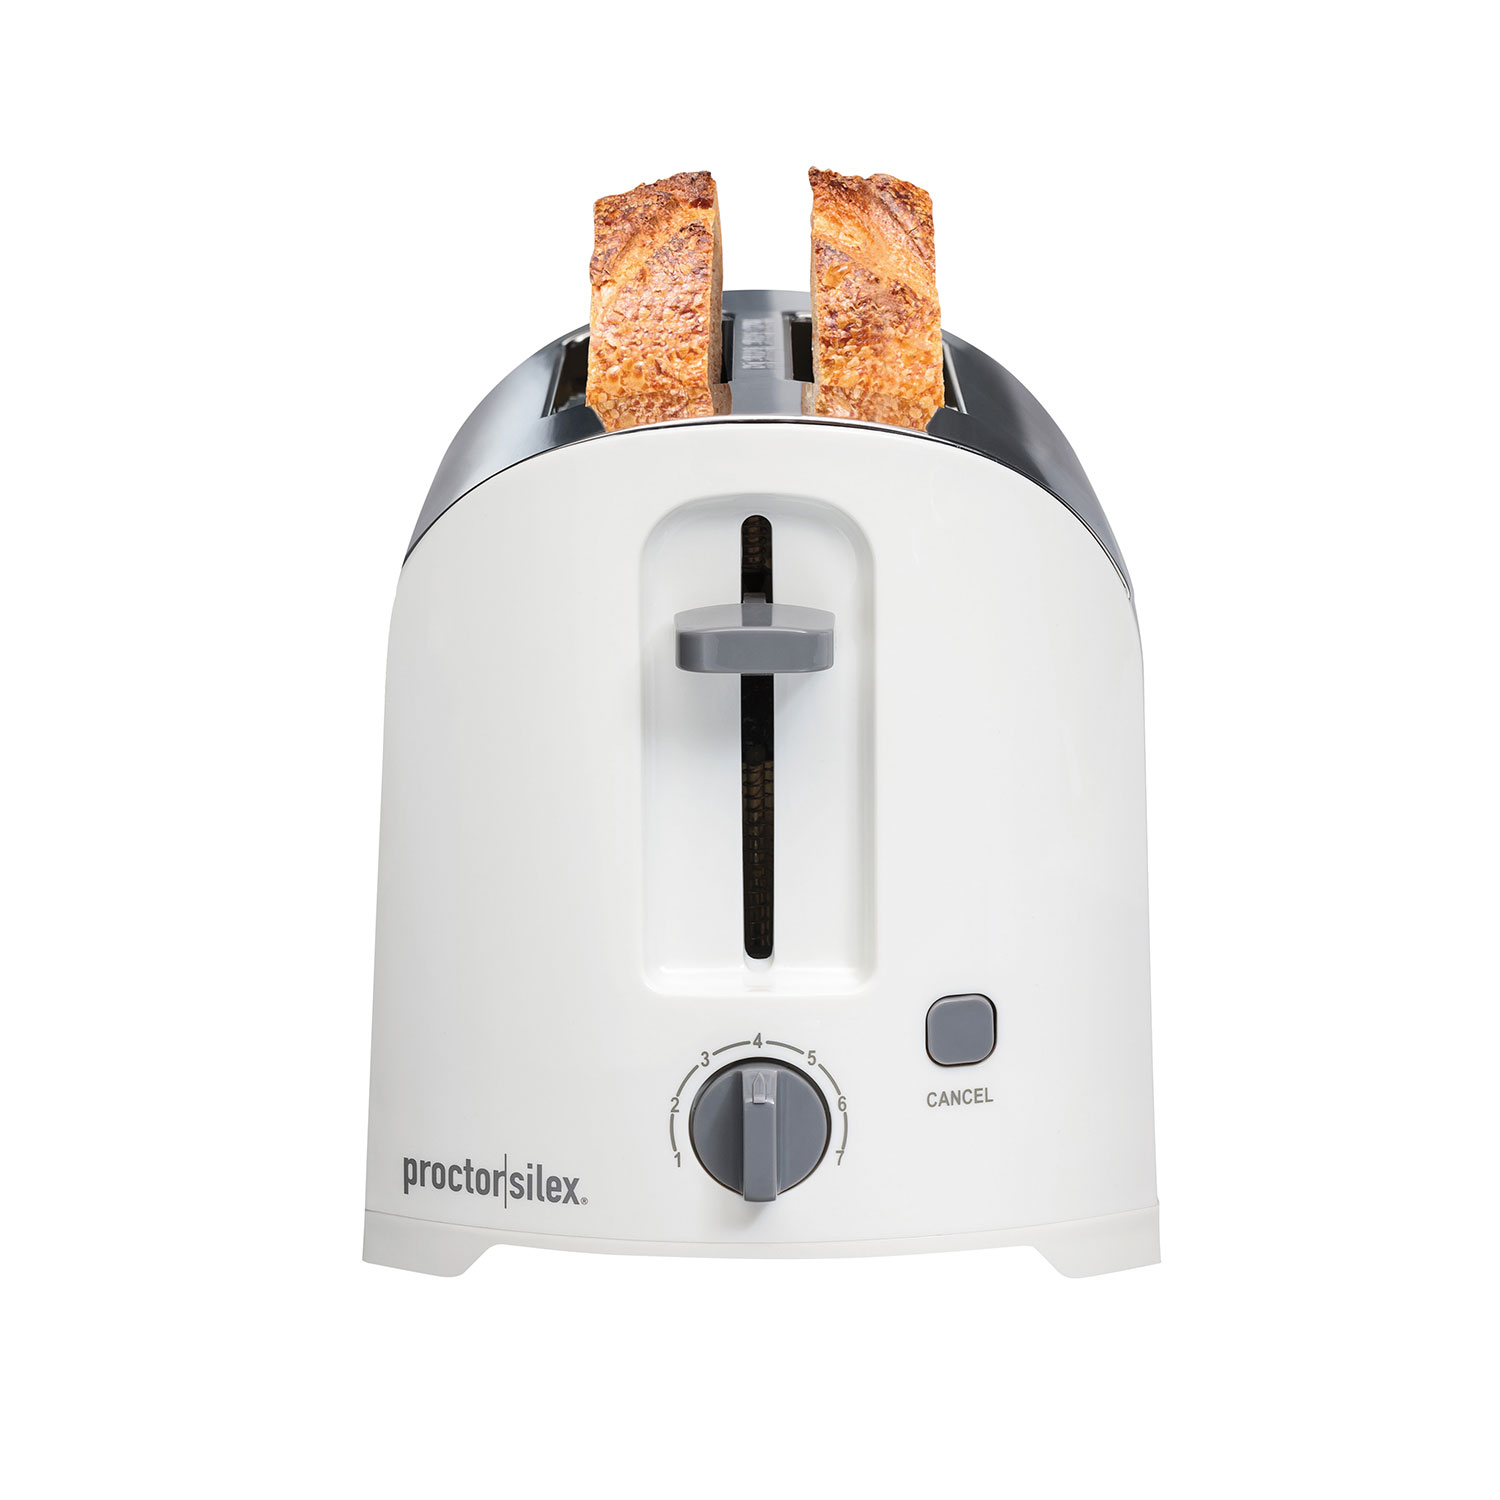 2 Slice Toaster, White and Polished Stainless Steel - 22632PS Small Size